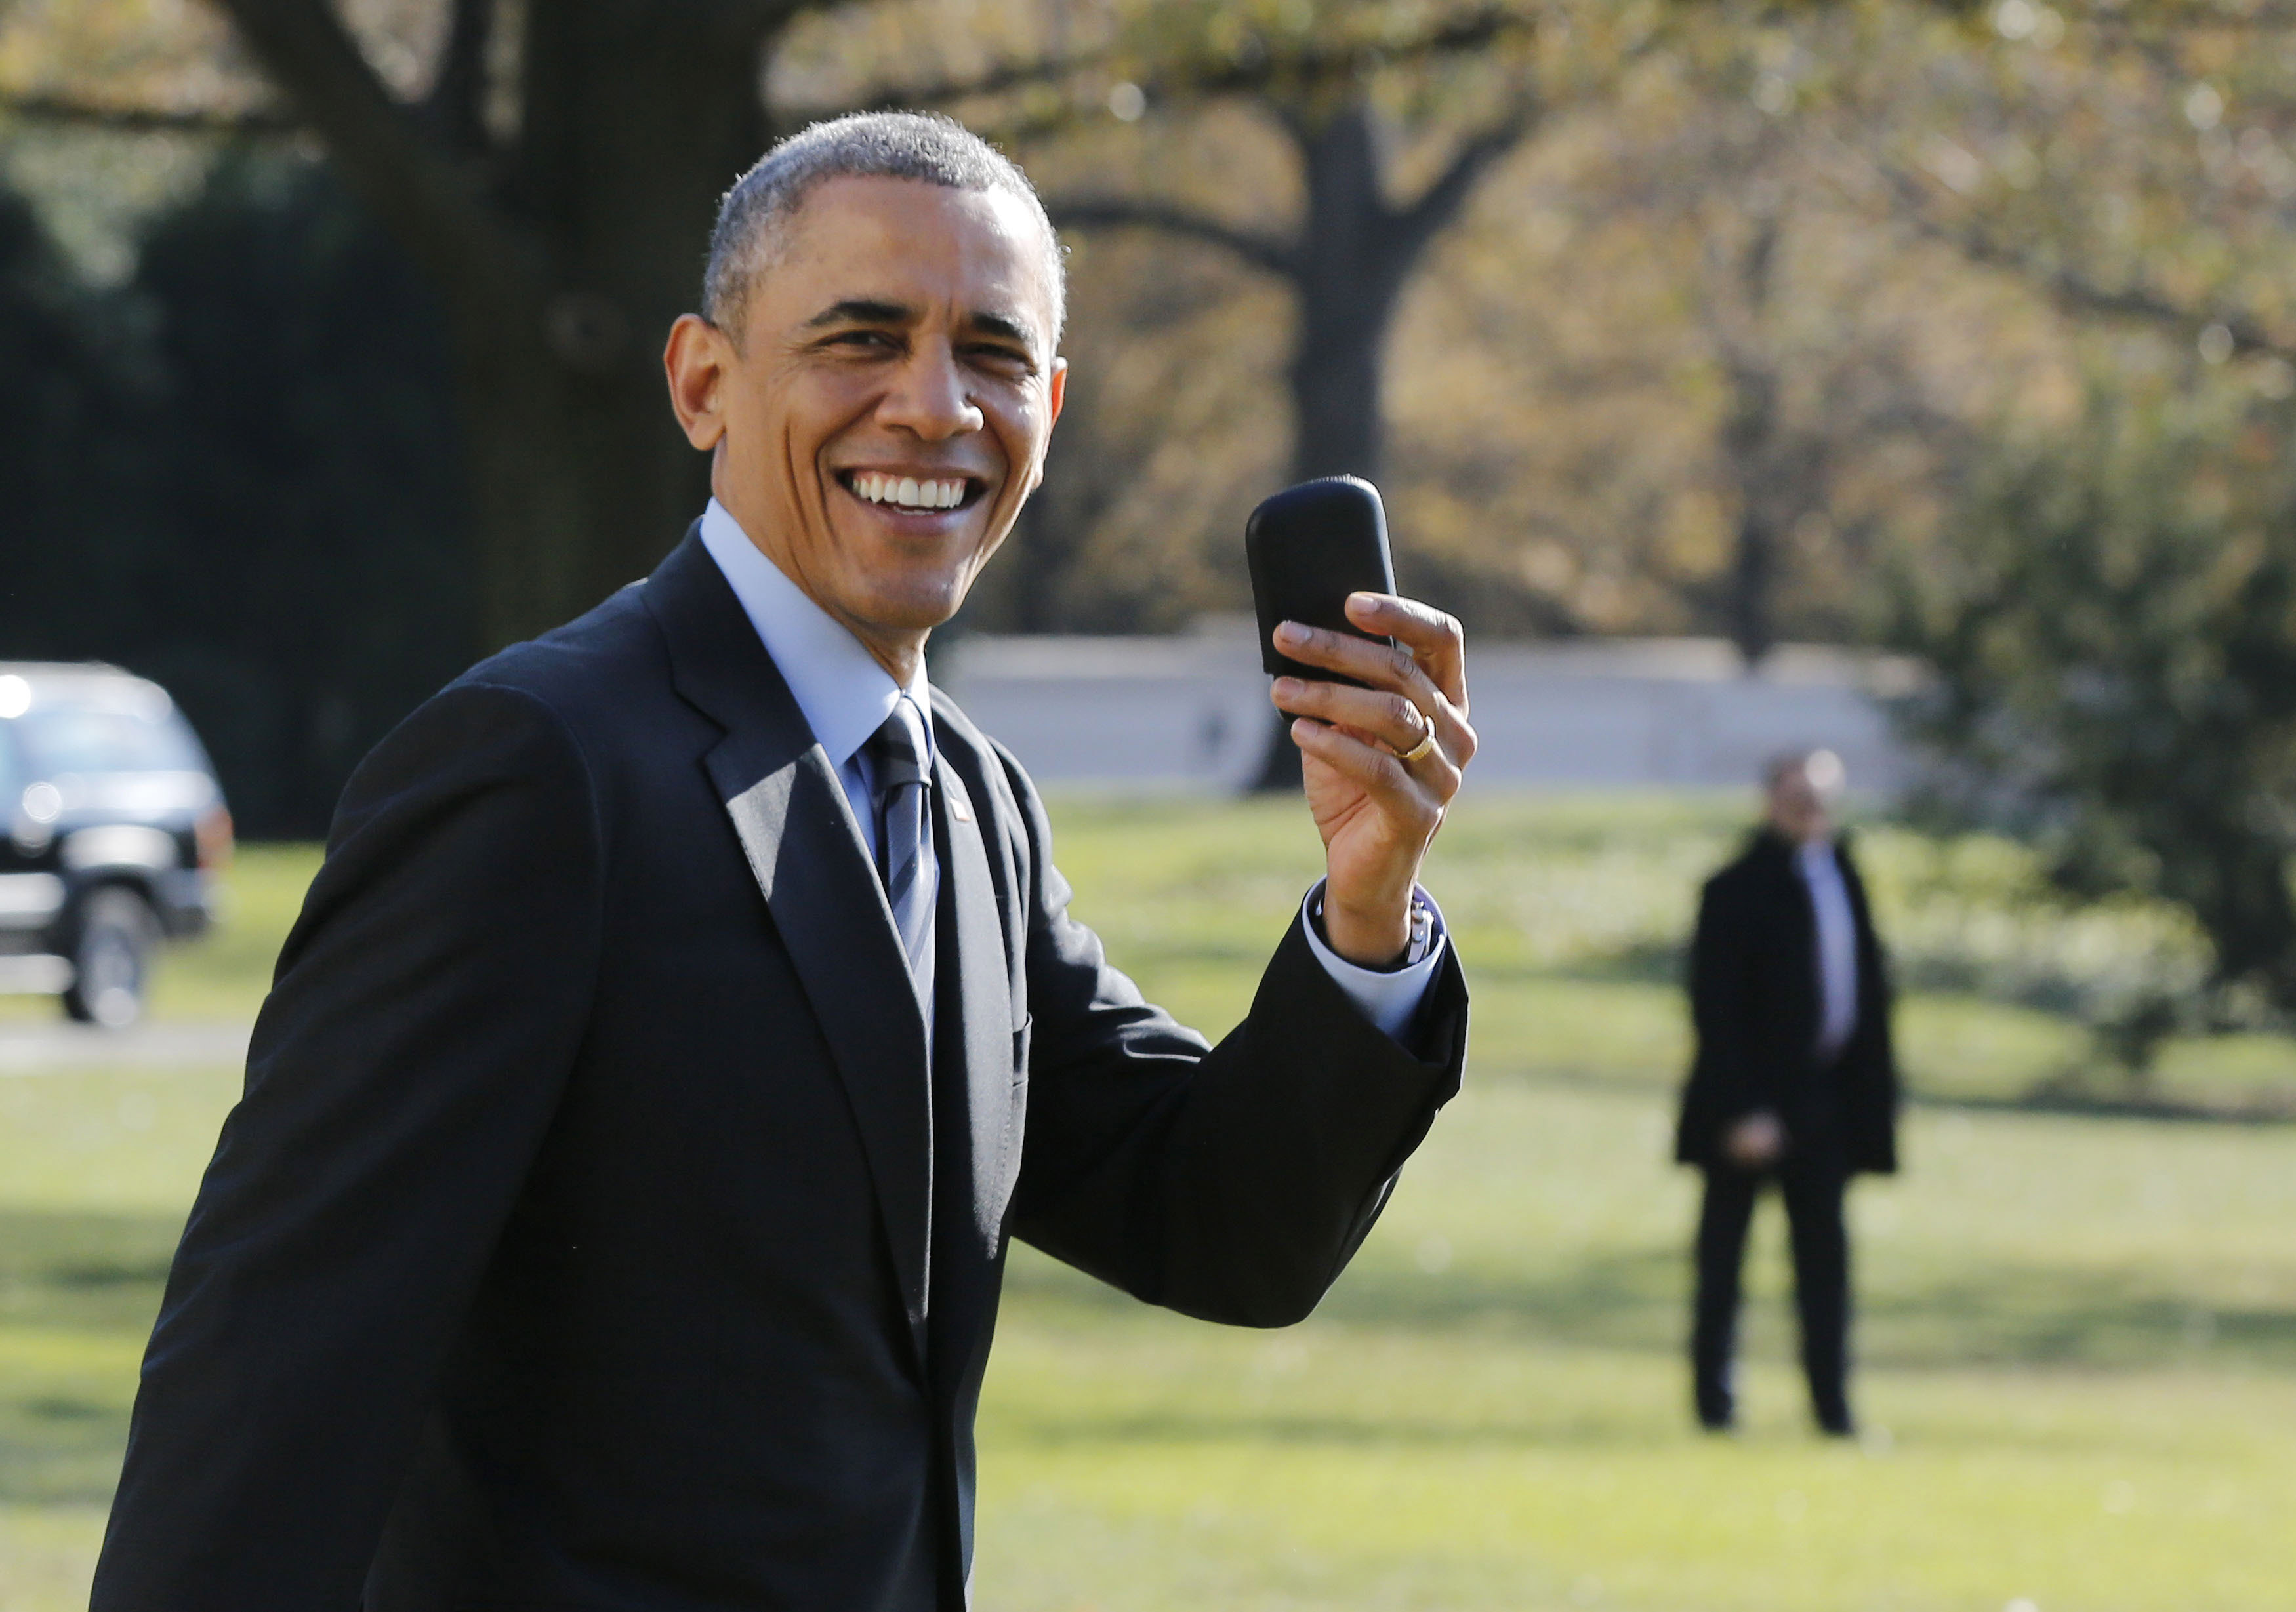 U.S. President Barack Obama holds up his BlackBerry device after he returned inside the White House to retrieve it, after boarding Marine One on the South Lawn of the White House in Washington on Nov. 21, 2014.